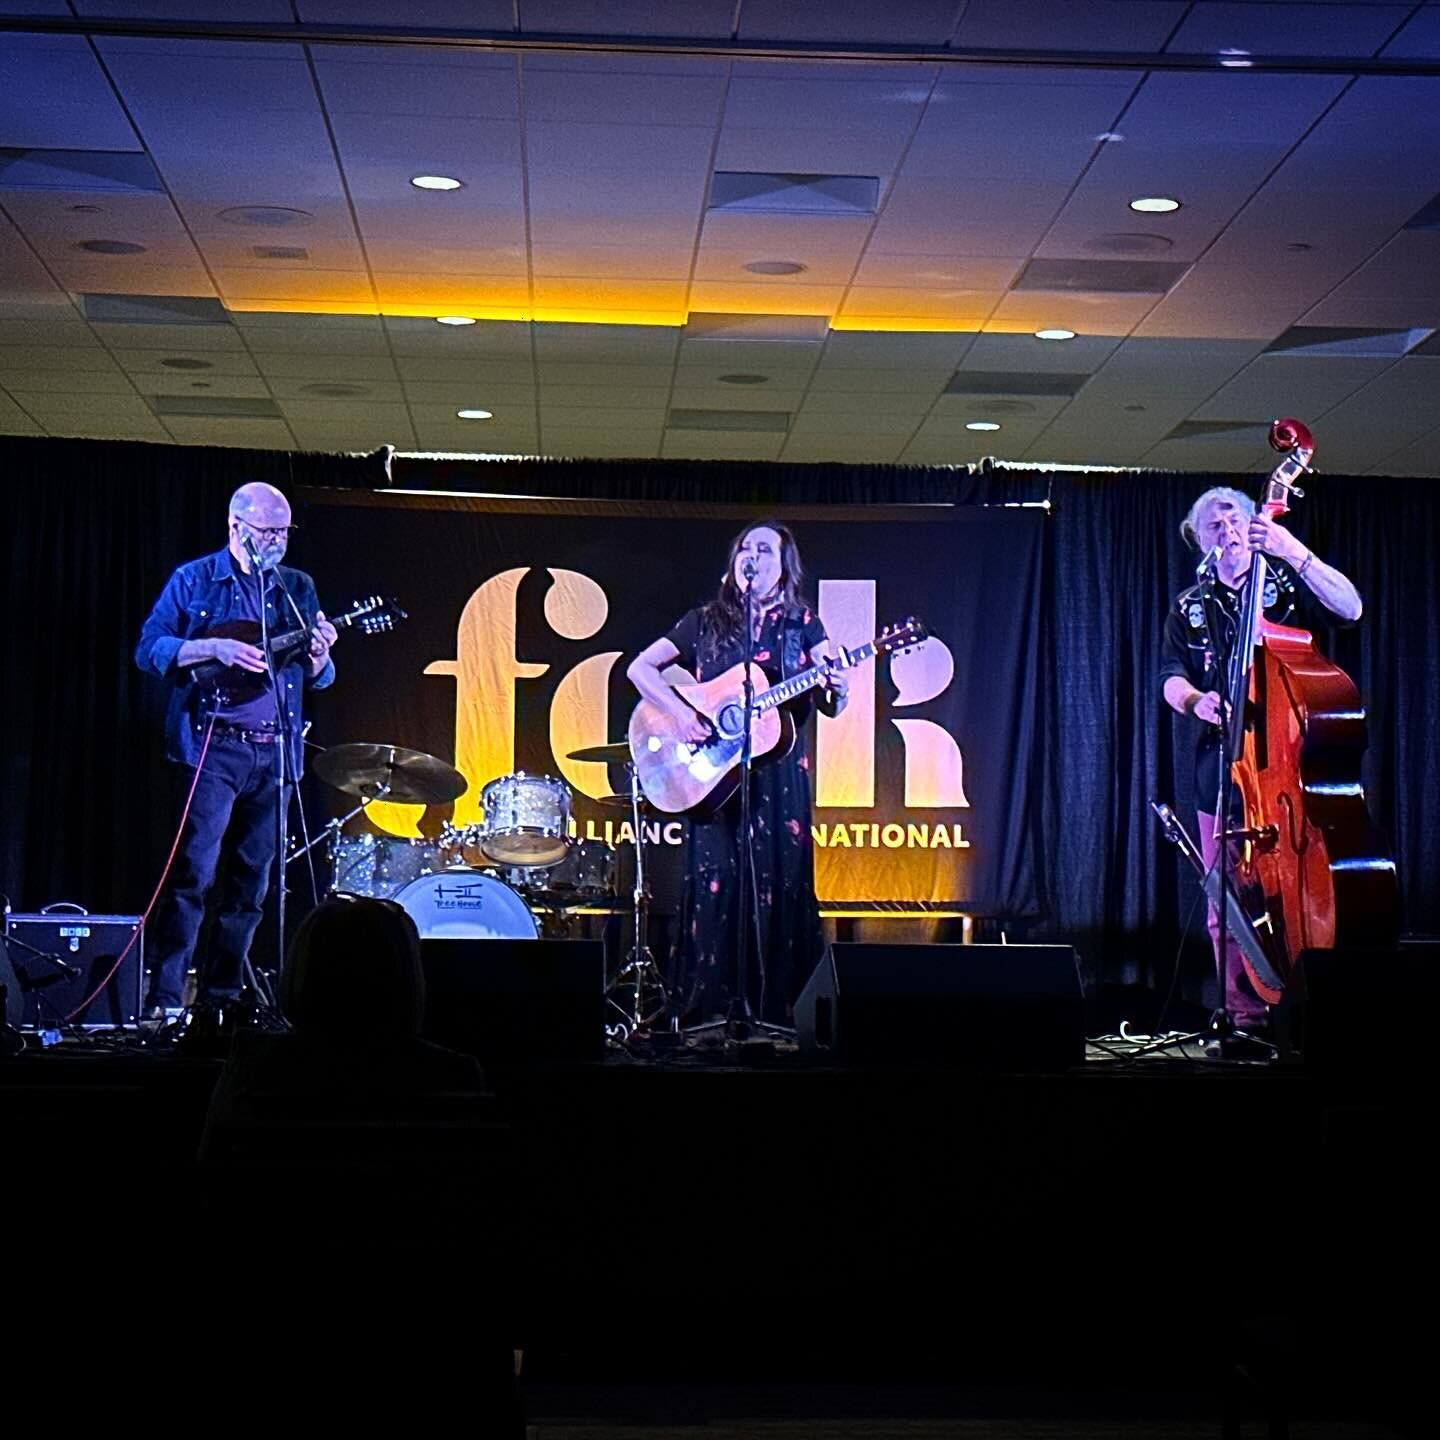 I had an amazing time performing at Folk Alliance in Kansas City - meeting new artists and old friends, discovering new music, and chatting with folk DJs and industry people - the atmosphere and experience were both so positive and kind. Special than